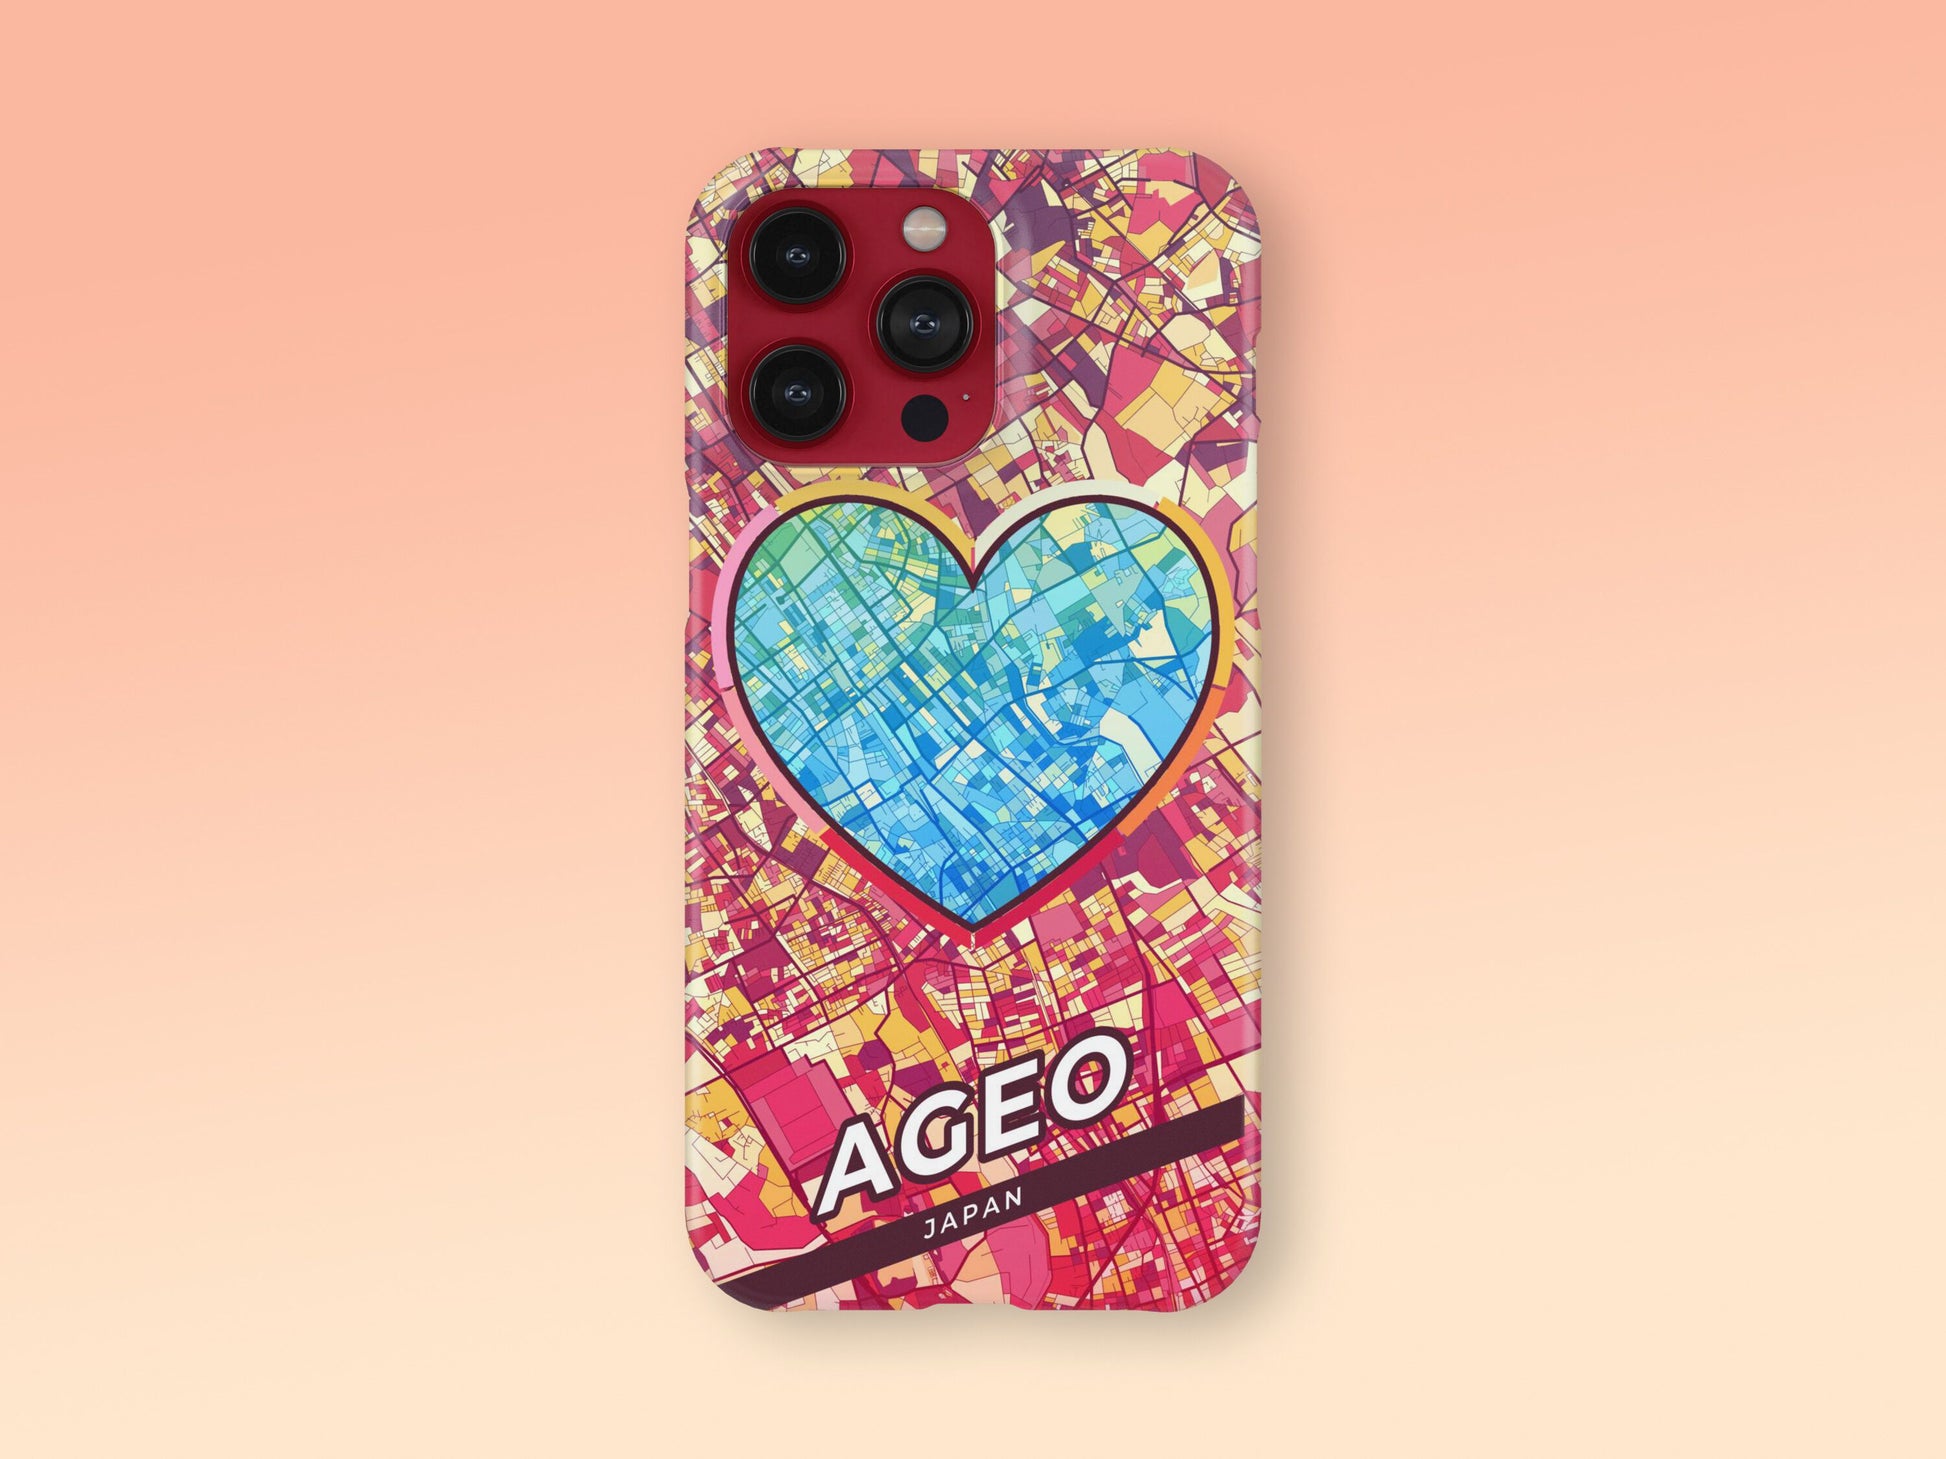 Ageo Japan slim phone case with colorful icon. Birthday, wedding or housewarming gift. Couple match cases. 2